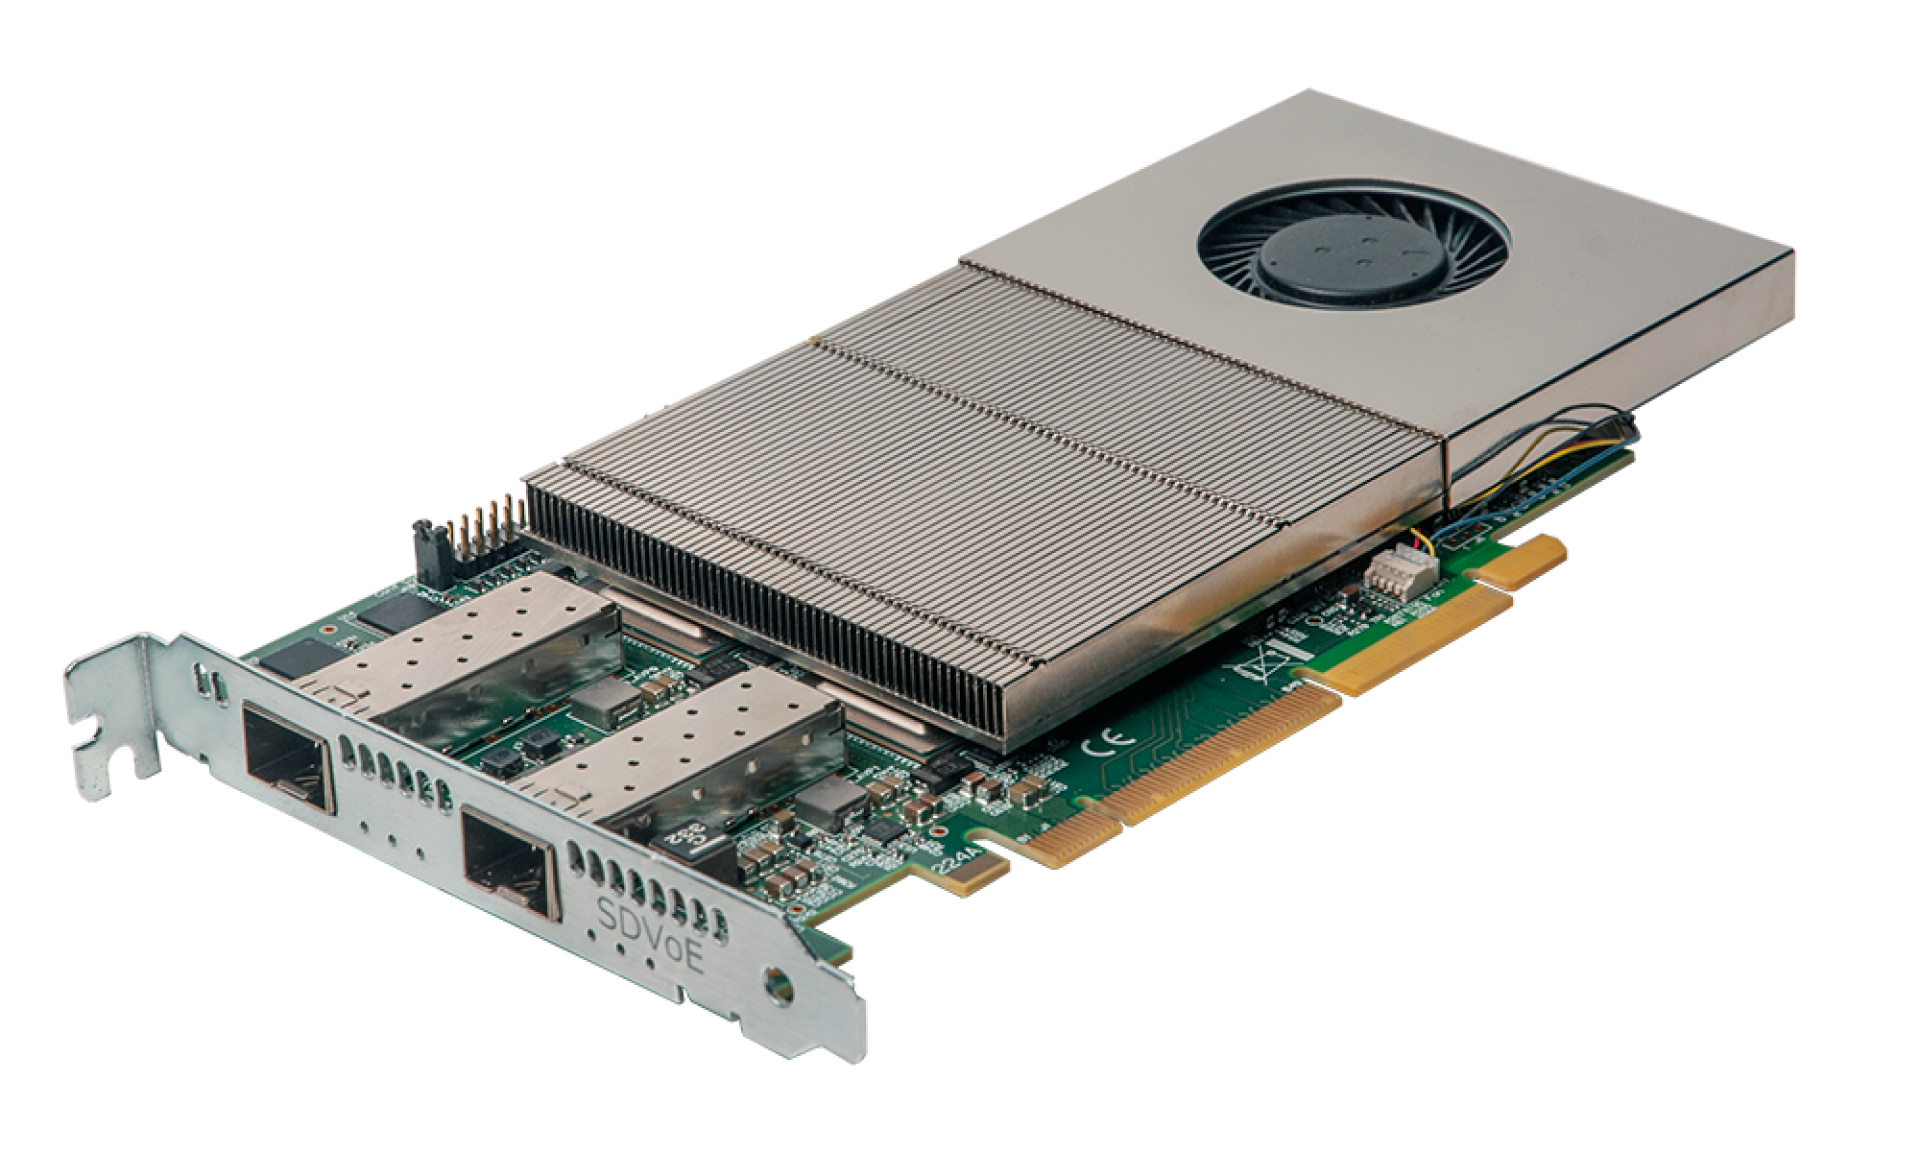 Datapath VisionSC S2 Video Capture Card